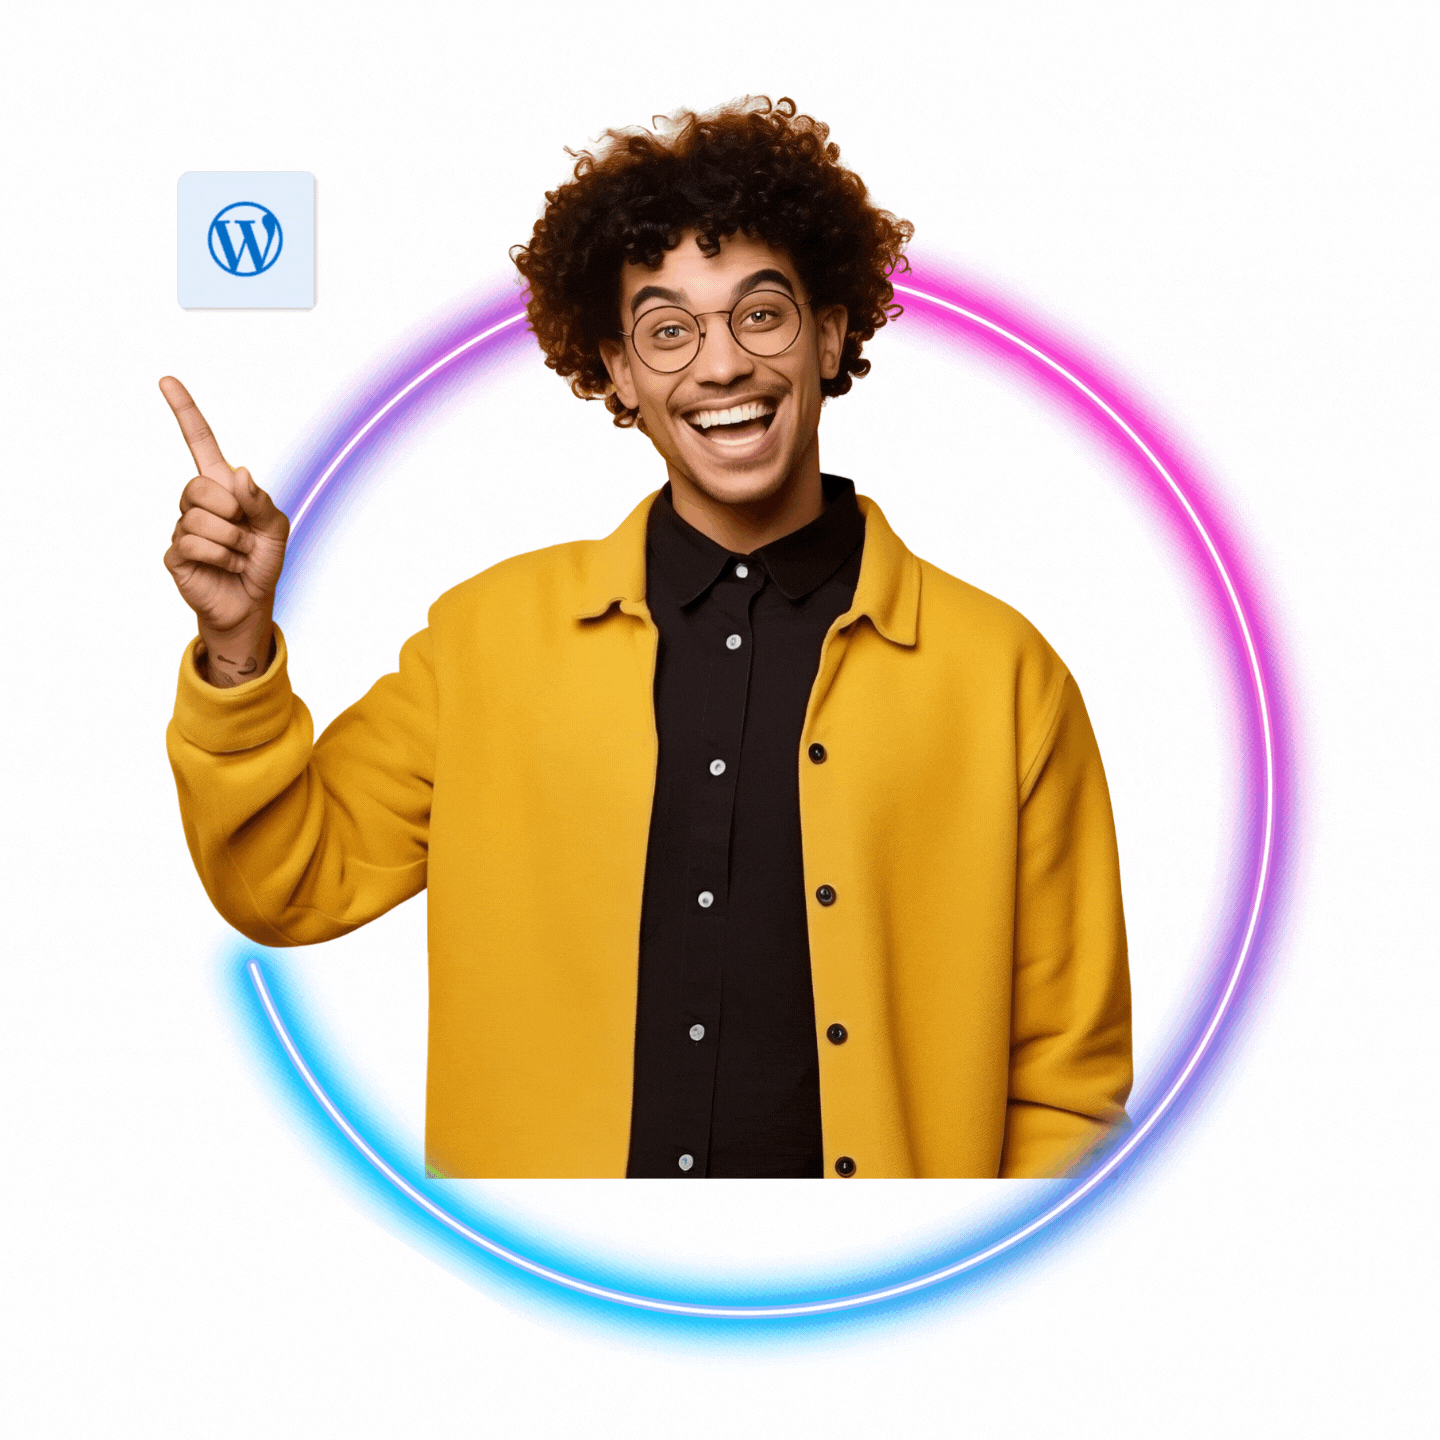 A GIF, where a cheerful person working in Good Design pointing fingers to WordPress logo